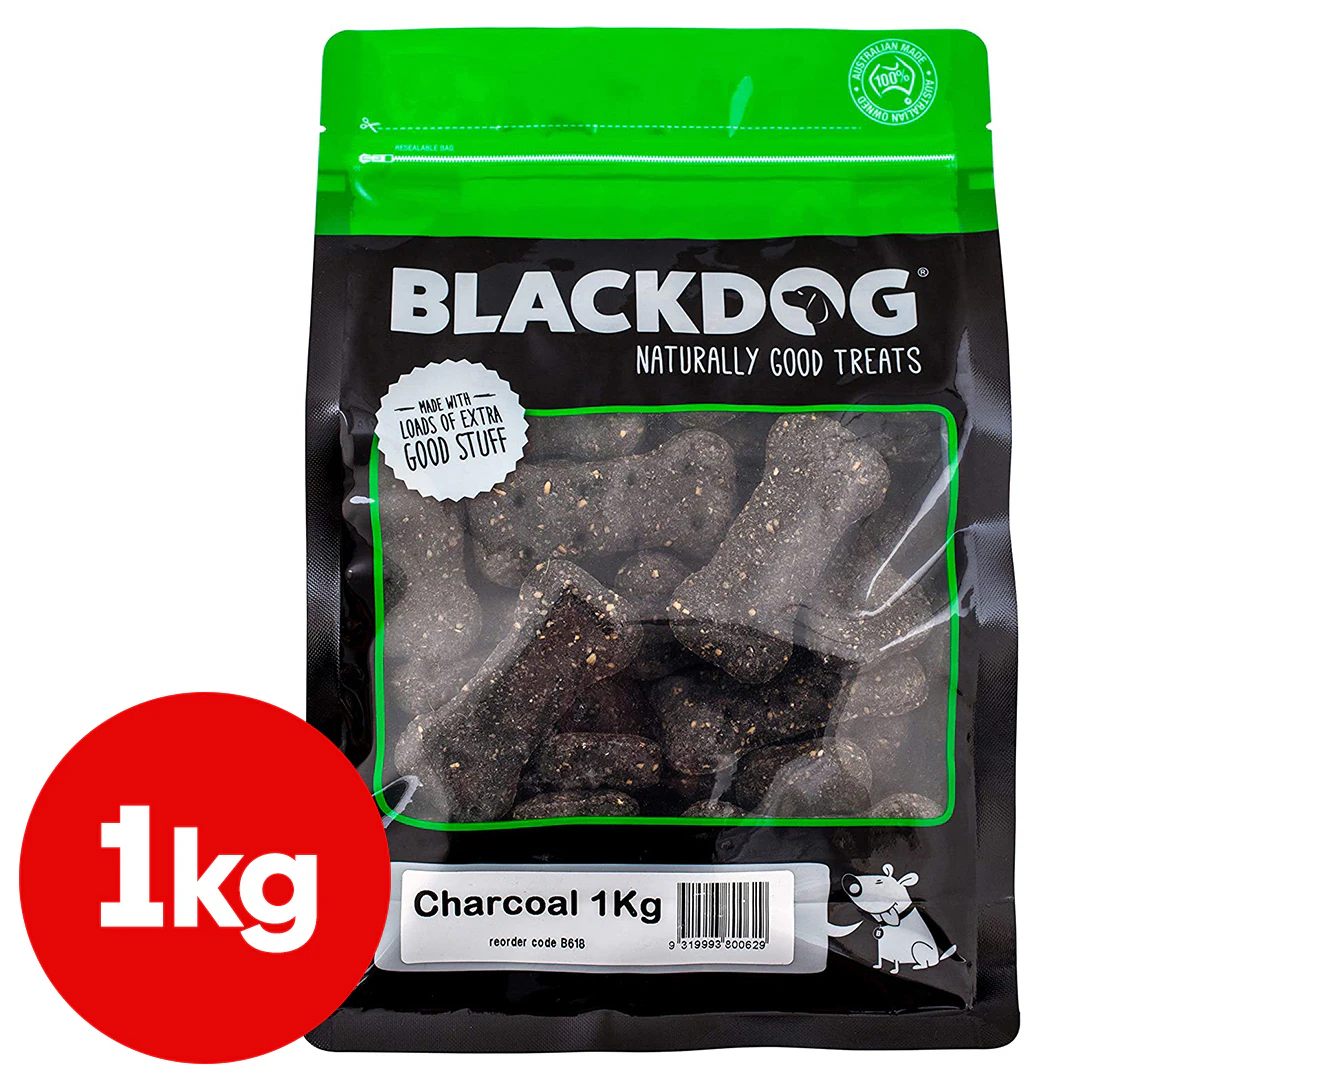 are charcoal biscuits safe for dogs